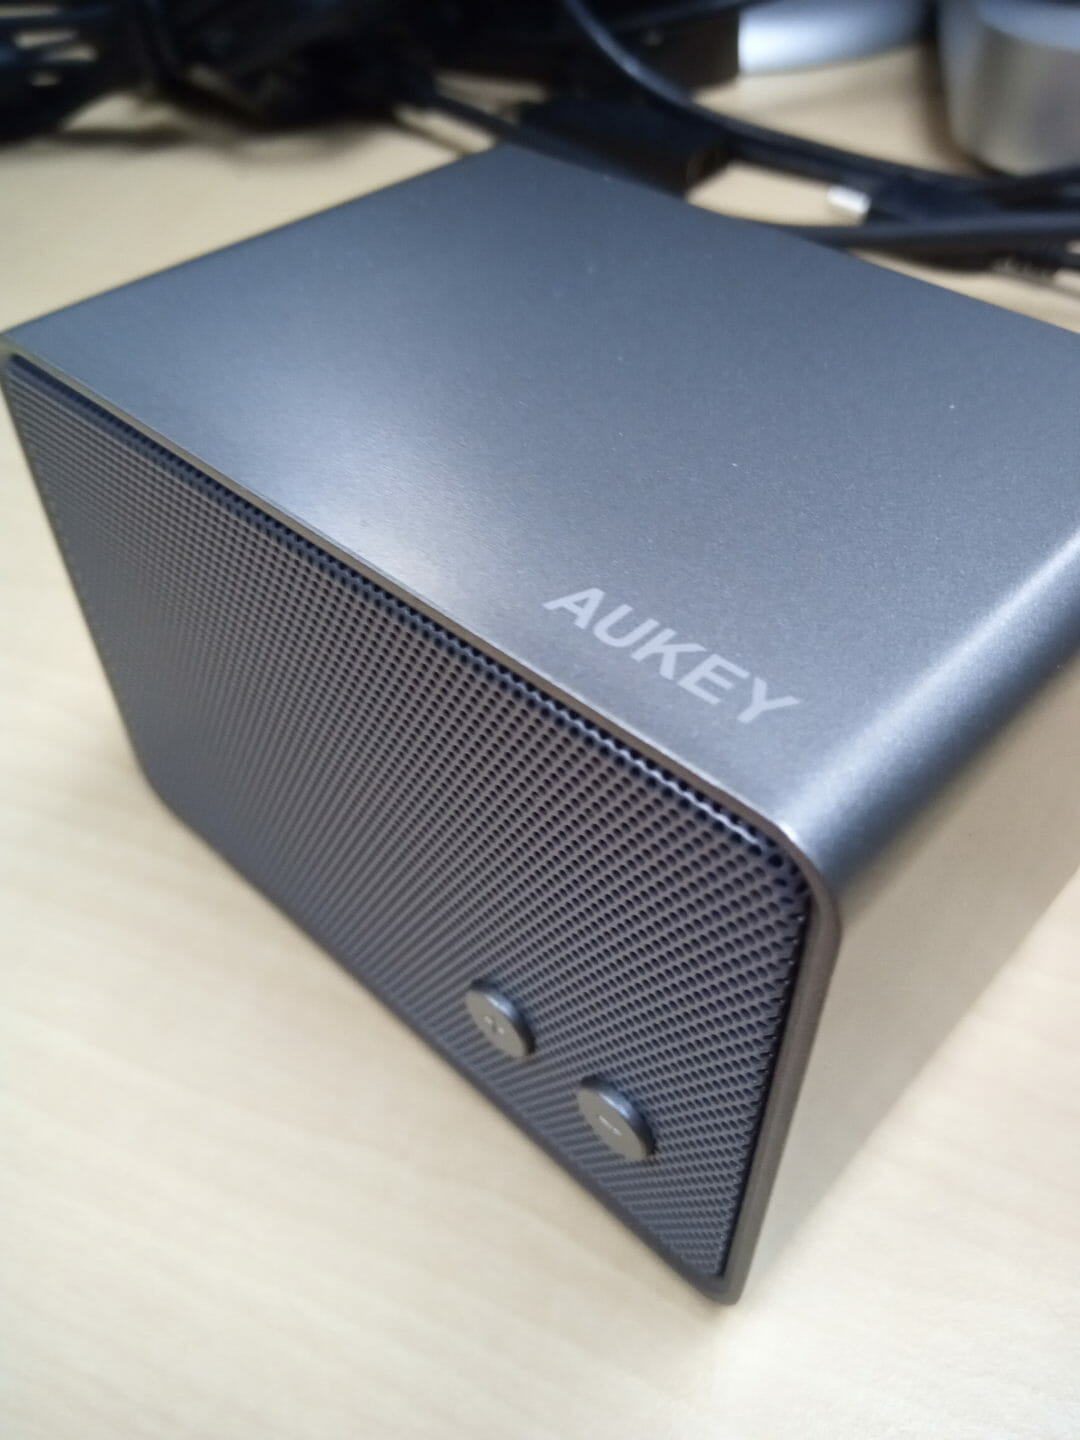 AUKEY Bluetooth Speaker offers decent sound in a compact size